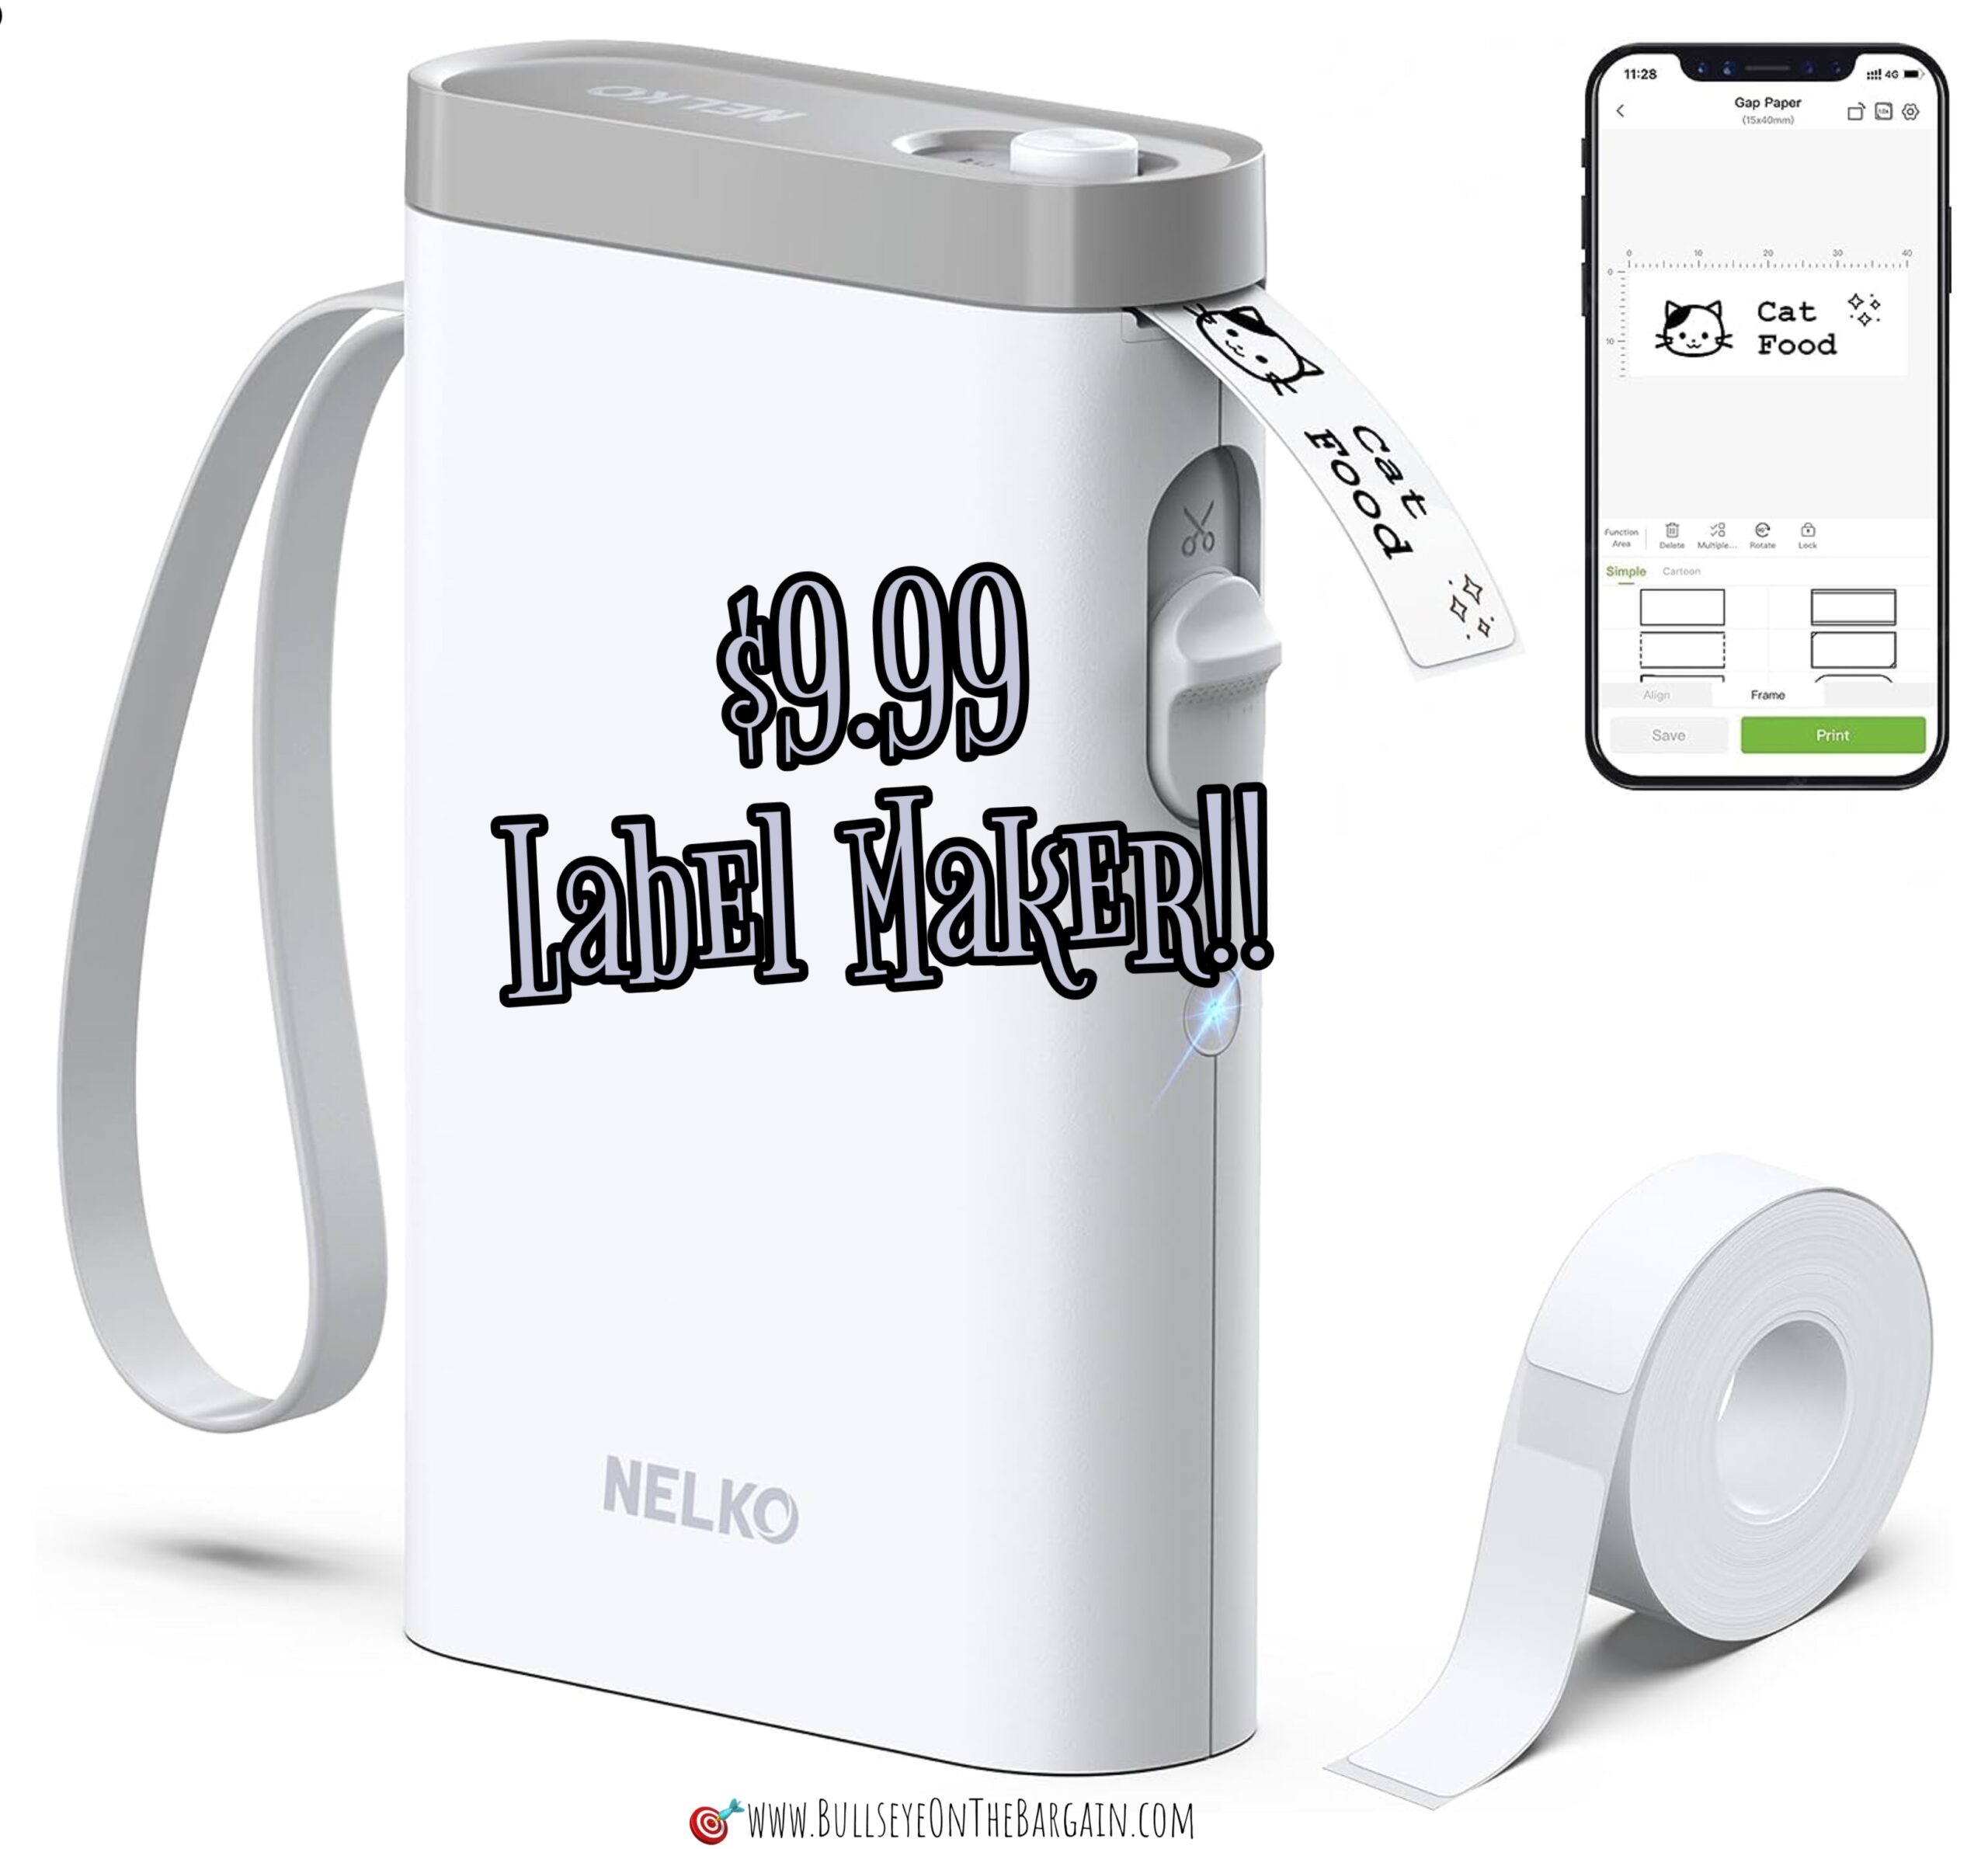 50% off this label maker!